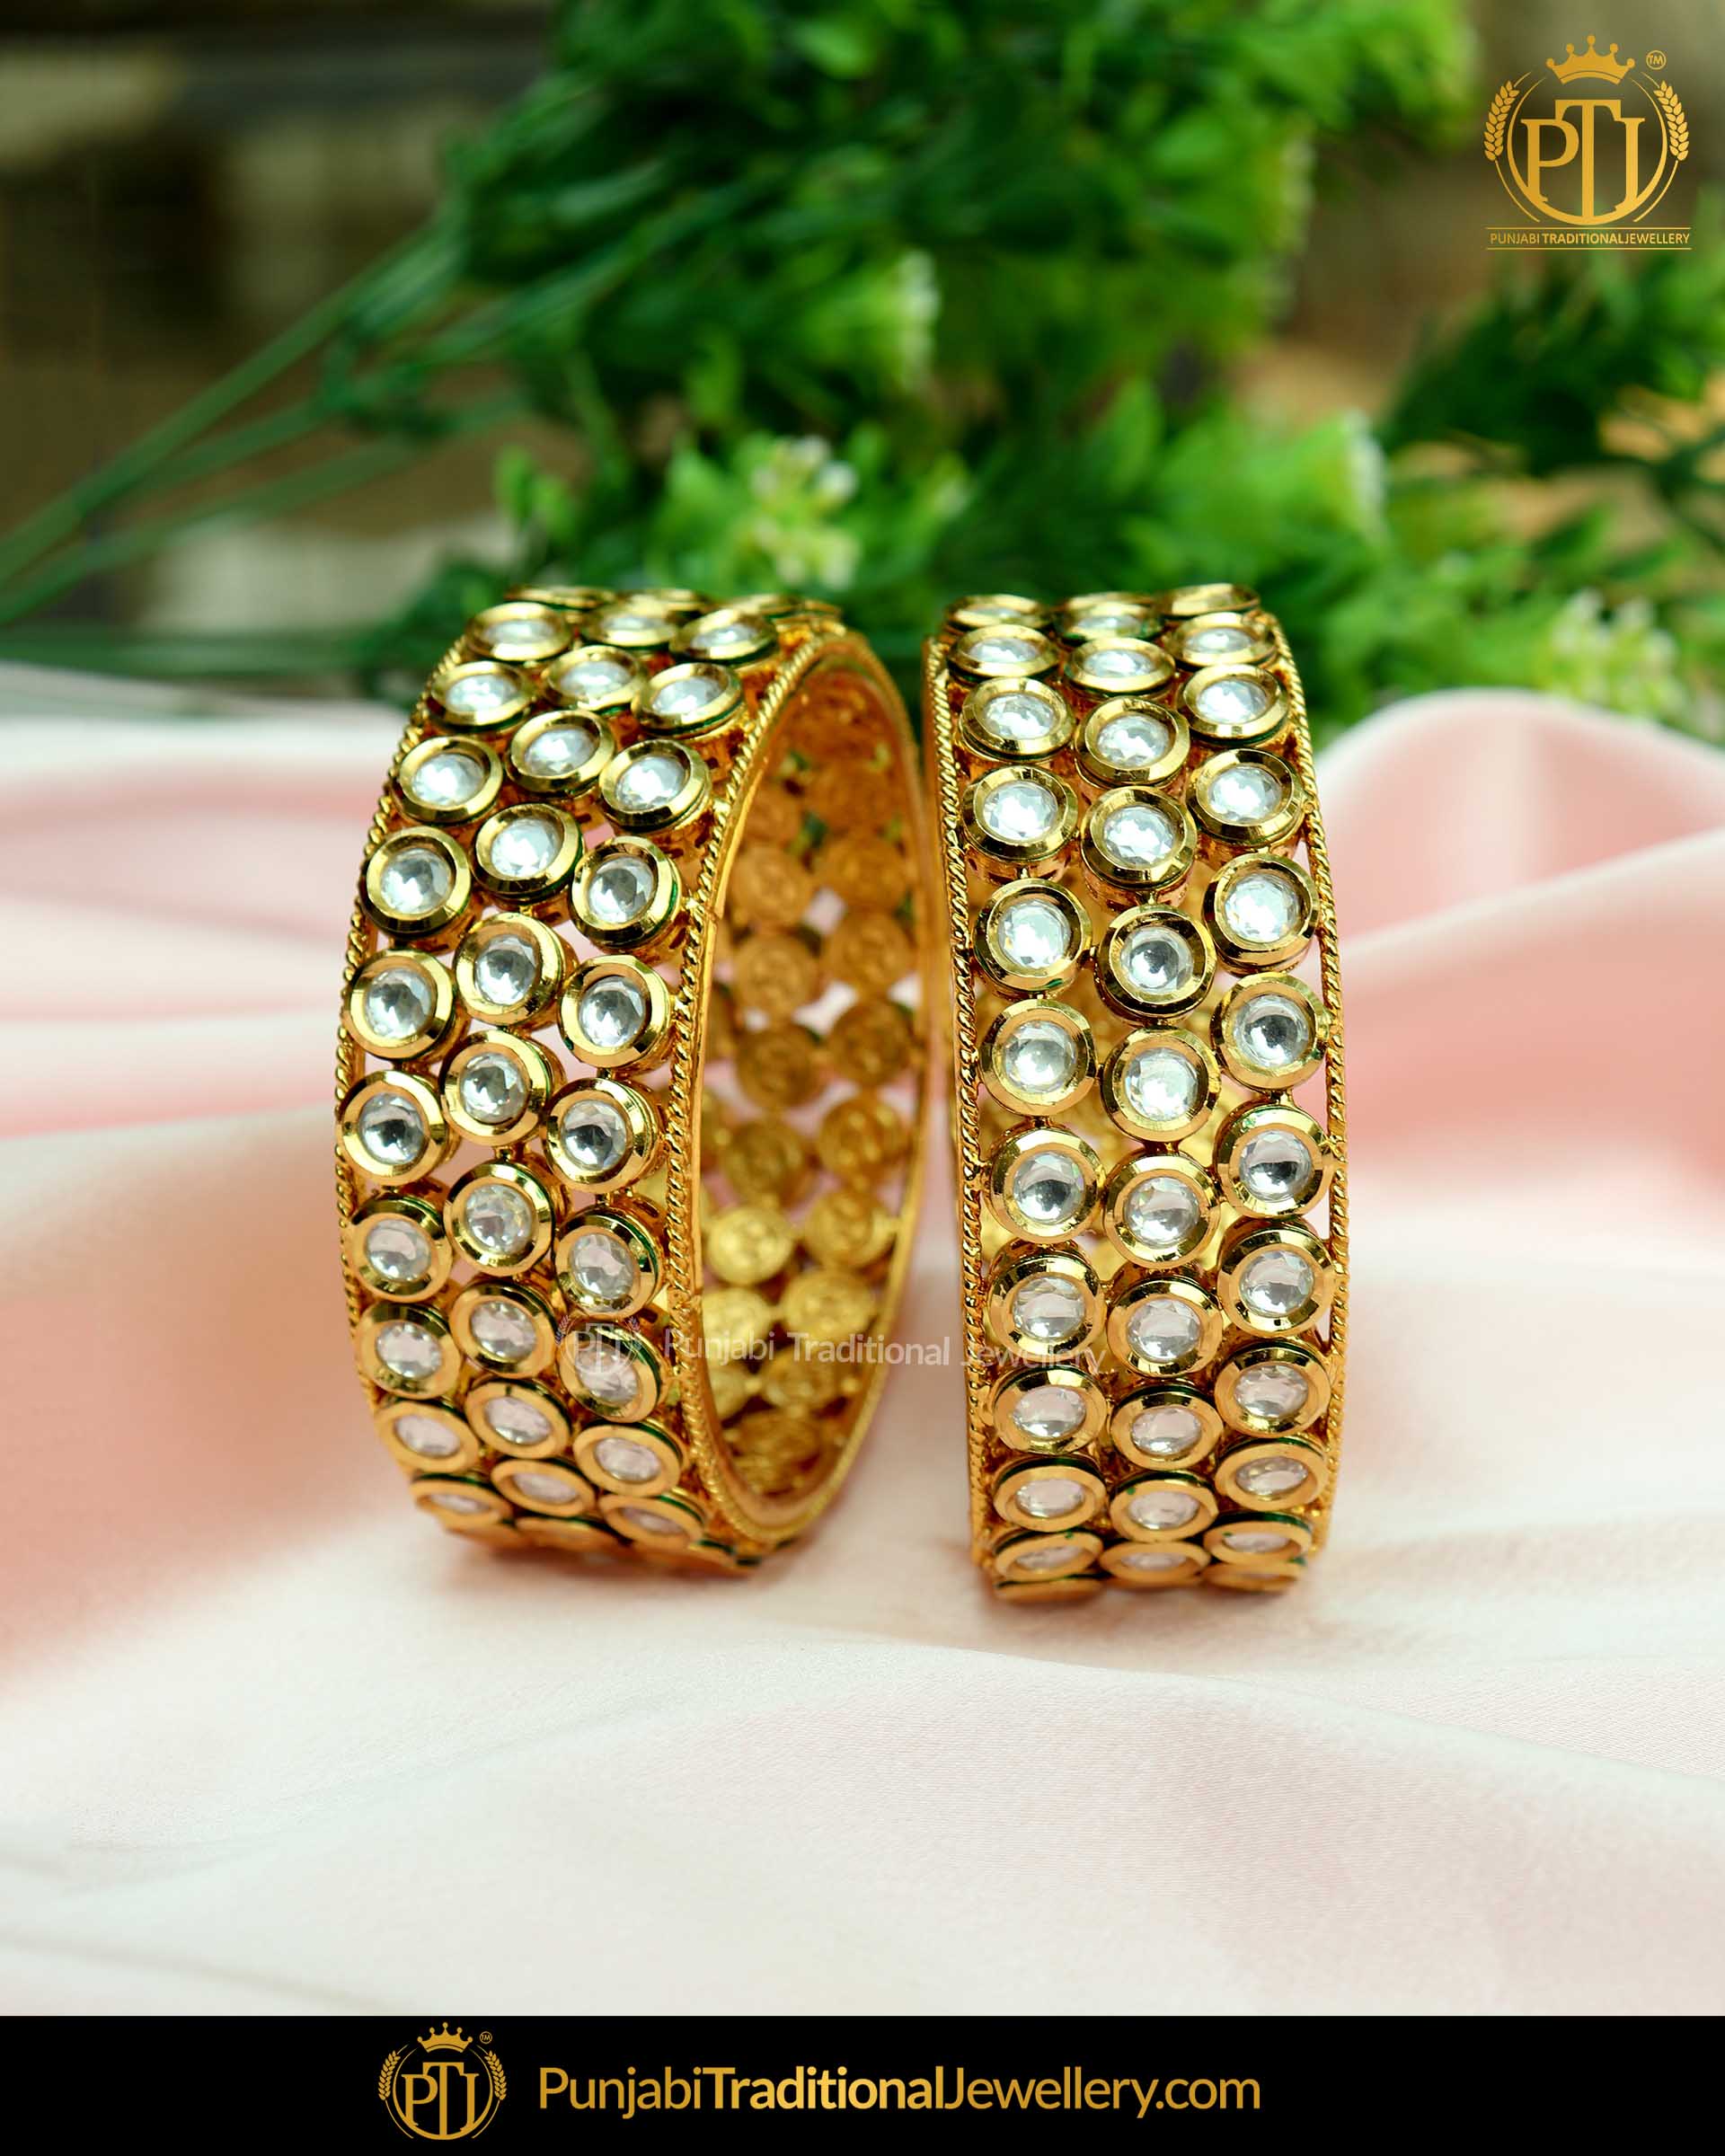 Gold Finished Kundan bangles Openable Bangles (Pair) | Punjabi Traditional Jewellery Exclusive